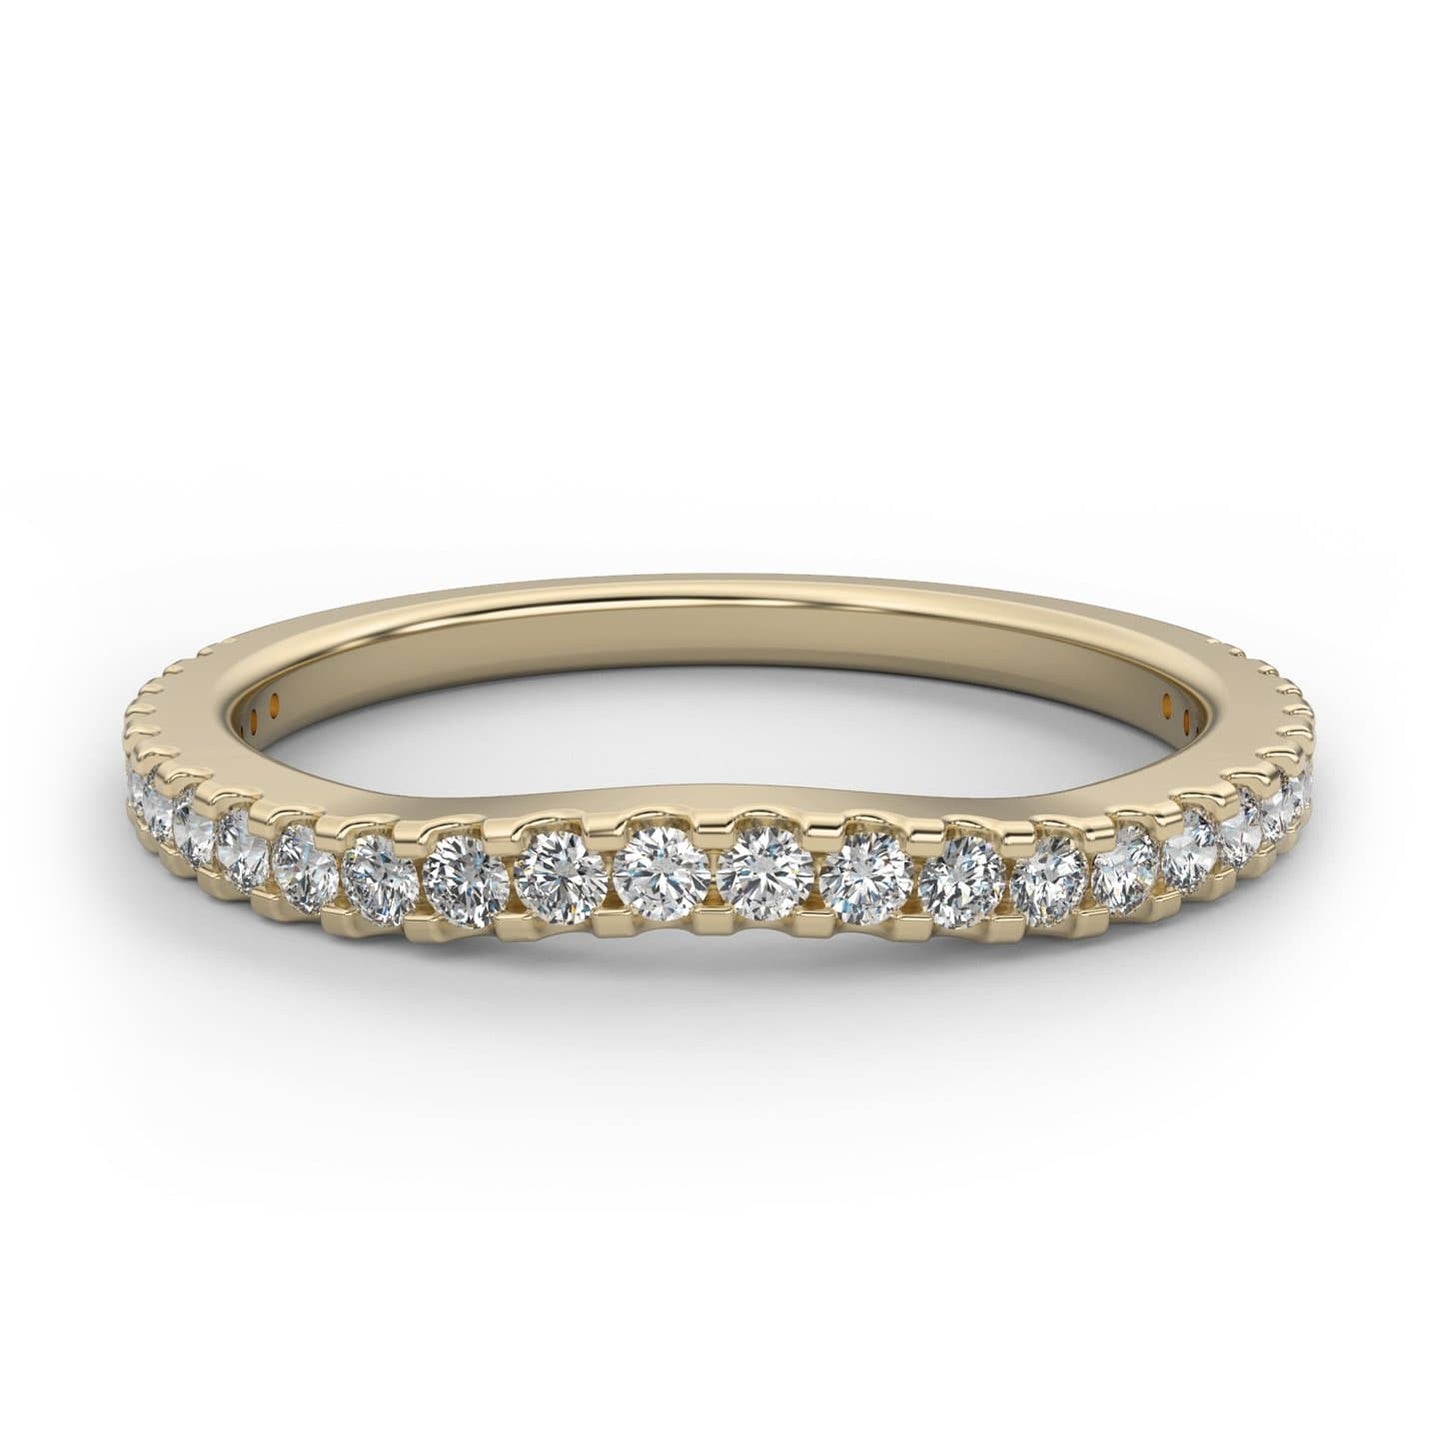 Curved Contour Semi-Eternity Diamond Ring in 14k Gold